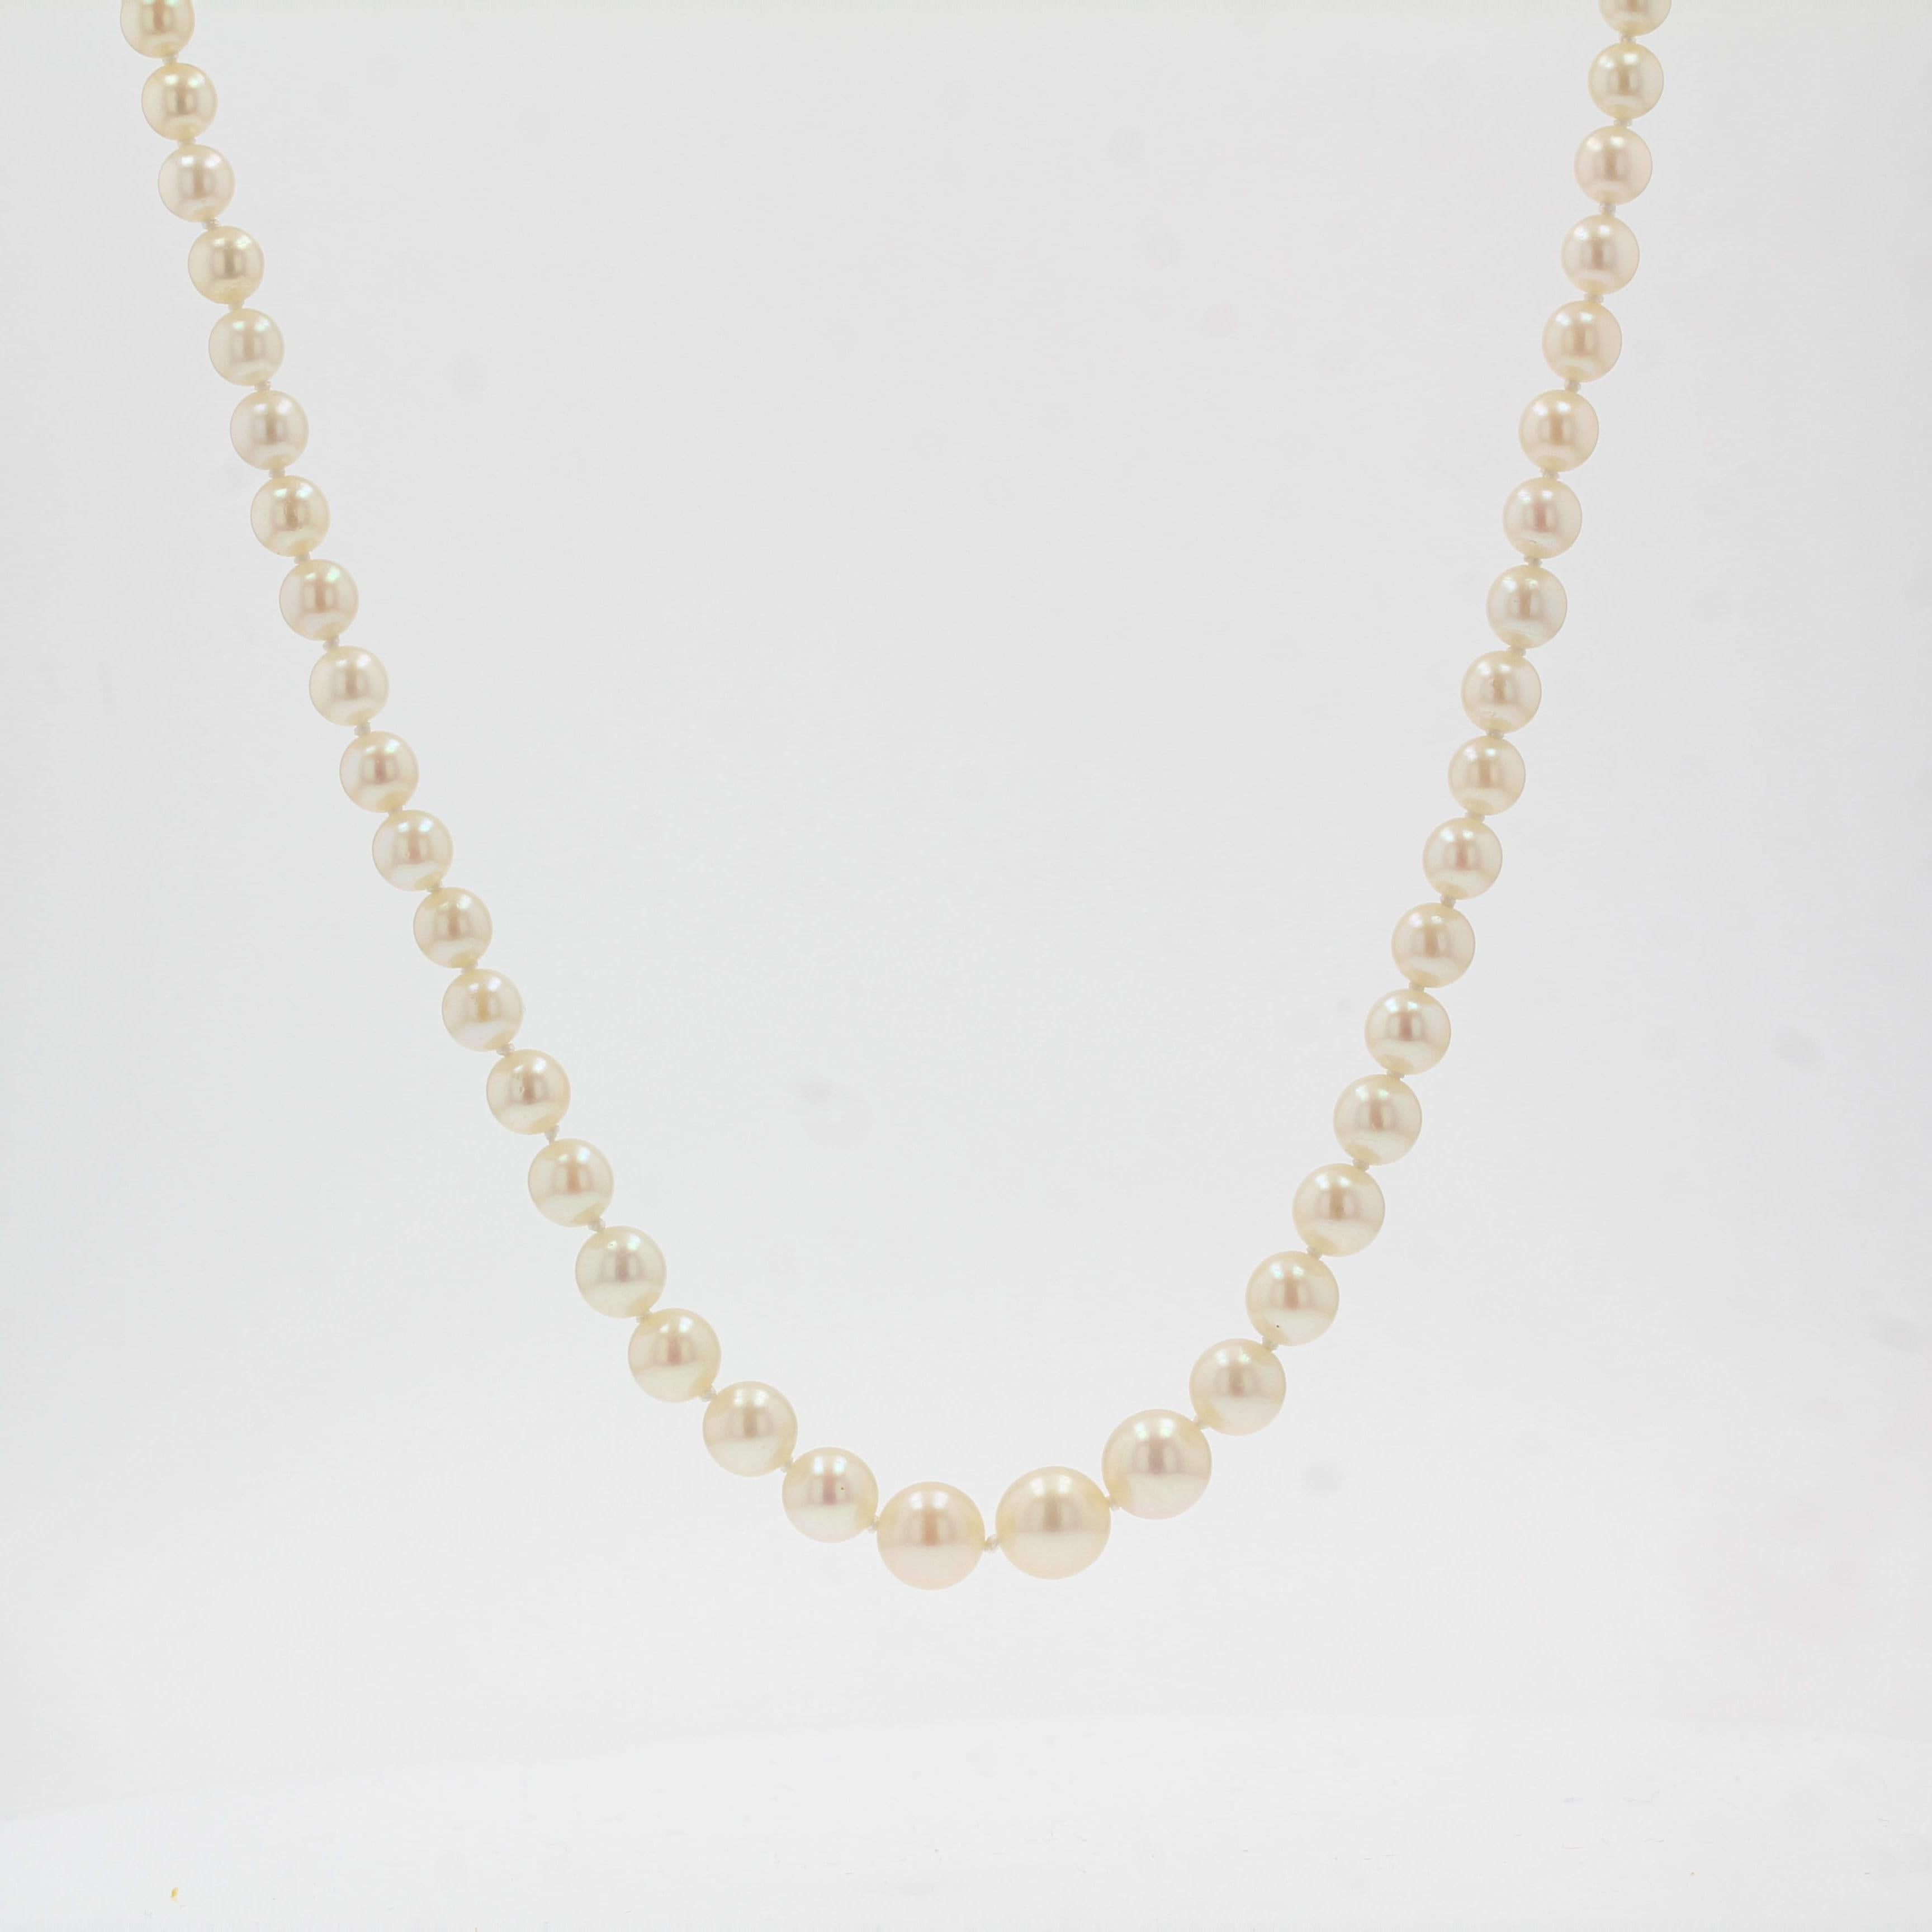 This pearl necklace is composed of a strand of Japanese cultured pearls which are held together by an 18K yellow gold clasp. 
Diameter of the pearls: 4/4,5 to 8 / 8,5 mm.
Overall length: 54,5 cm.
Total weight: approximately 22,1 g.
The necklace was